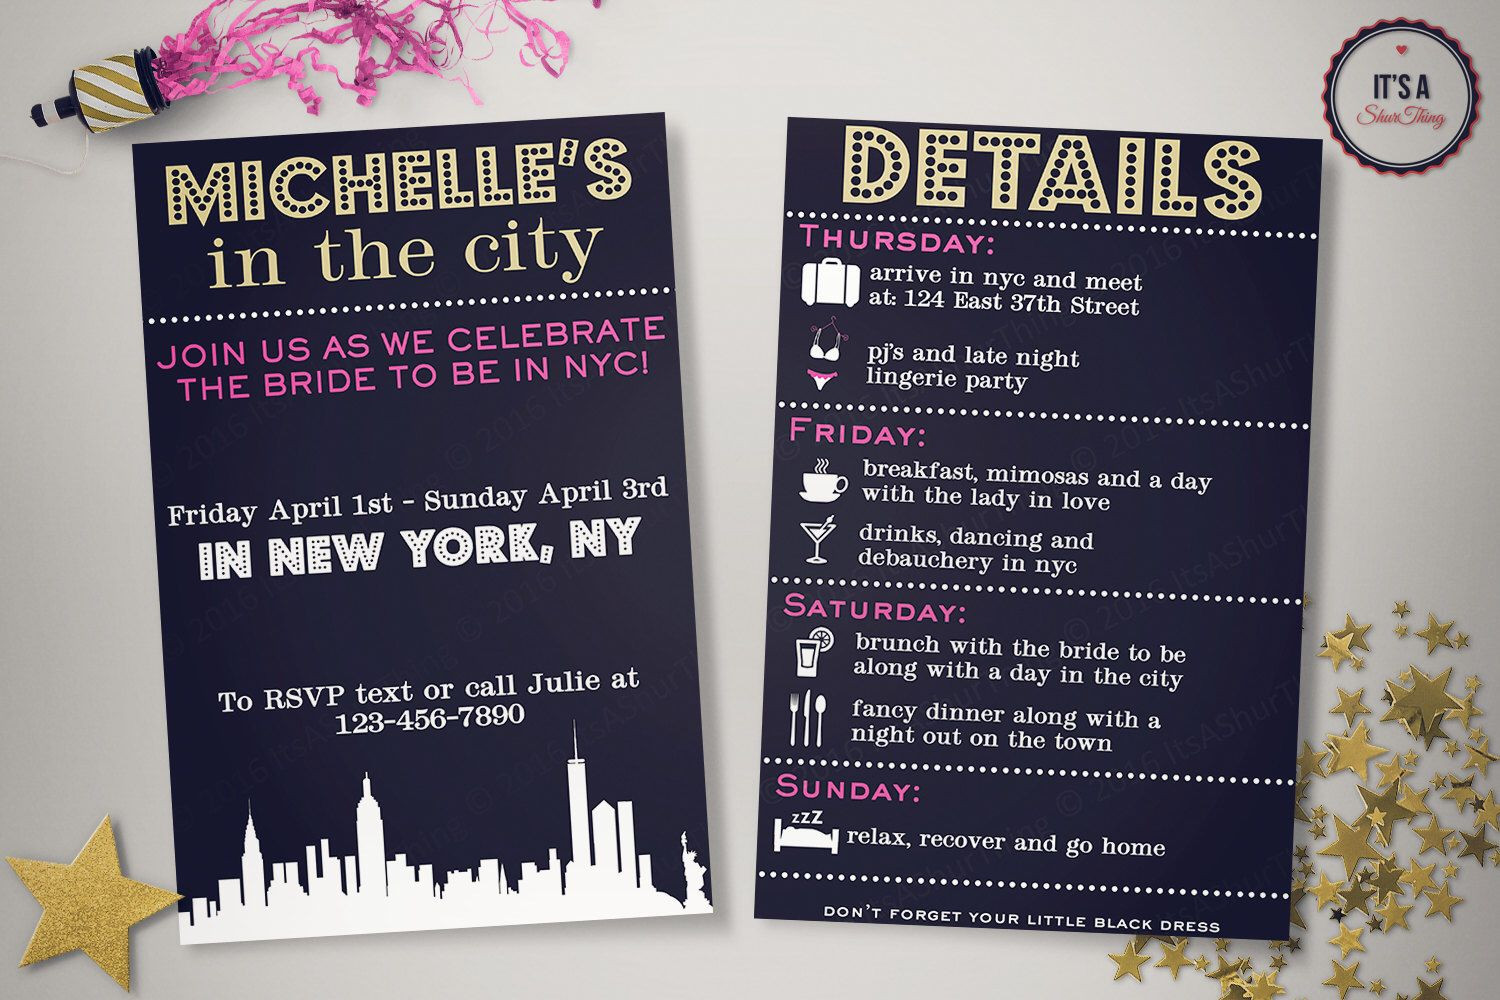 Best Bachelorette Party Ideas Nyc
 NYC Bachelorette Party Invitation Itinerary The City New